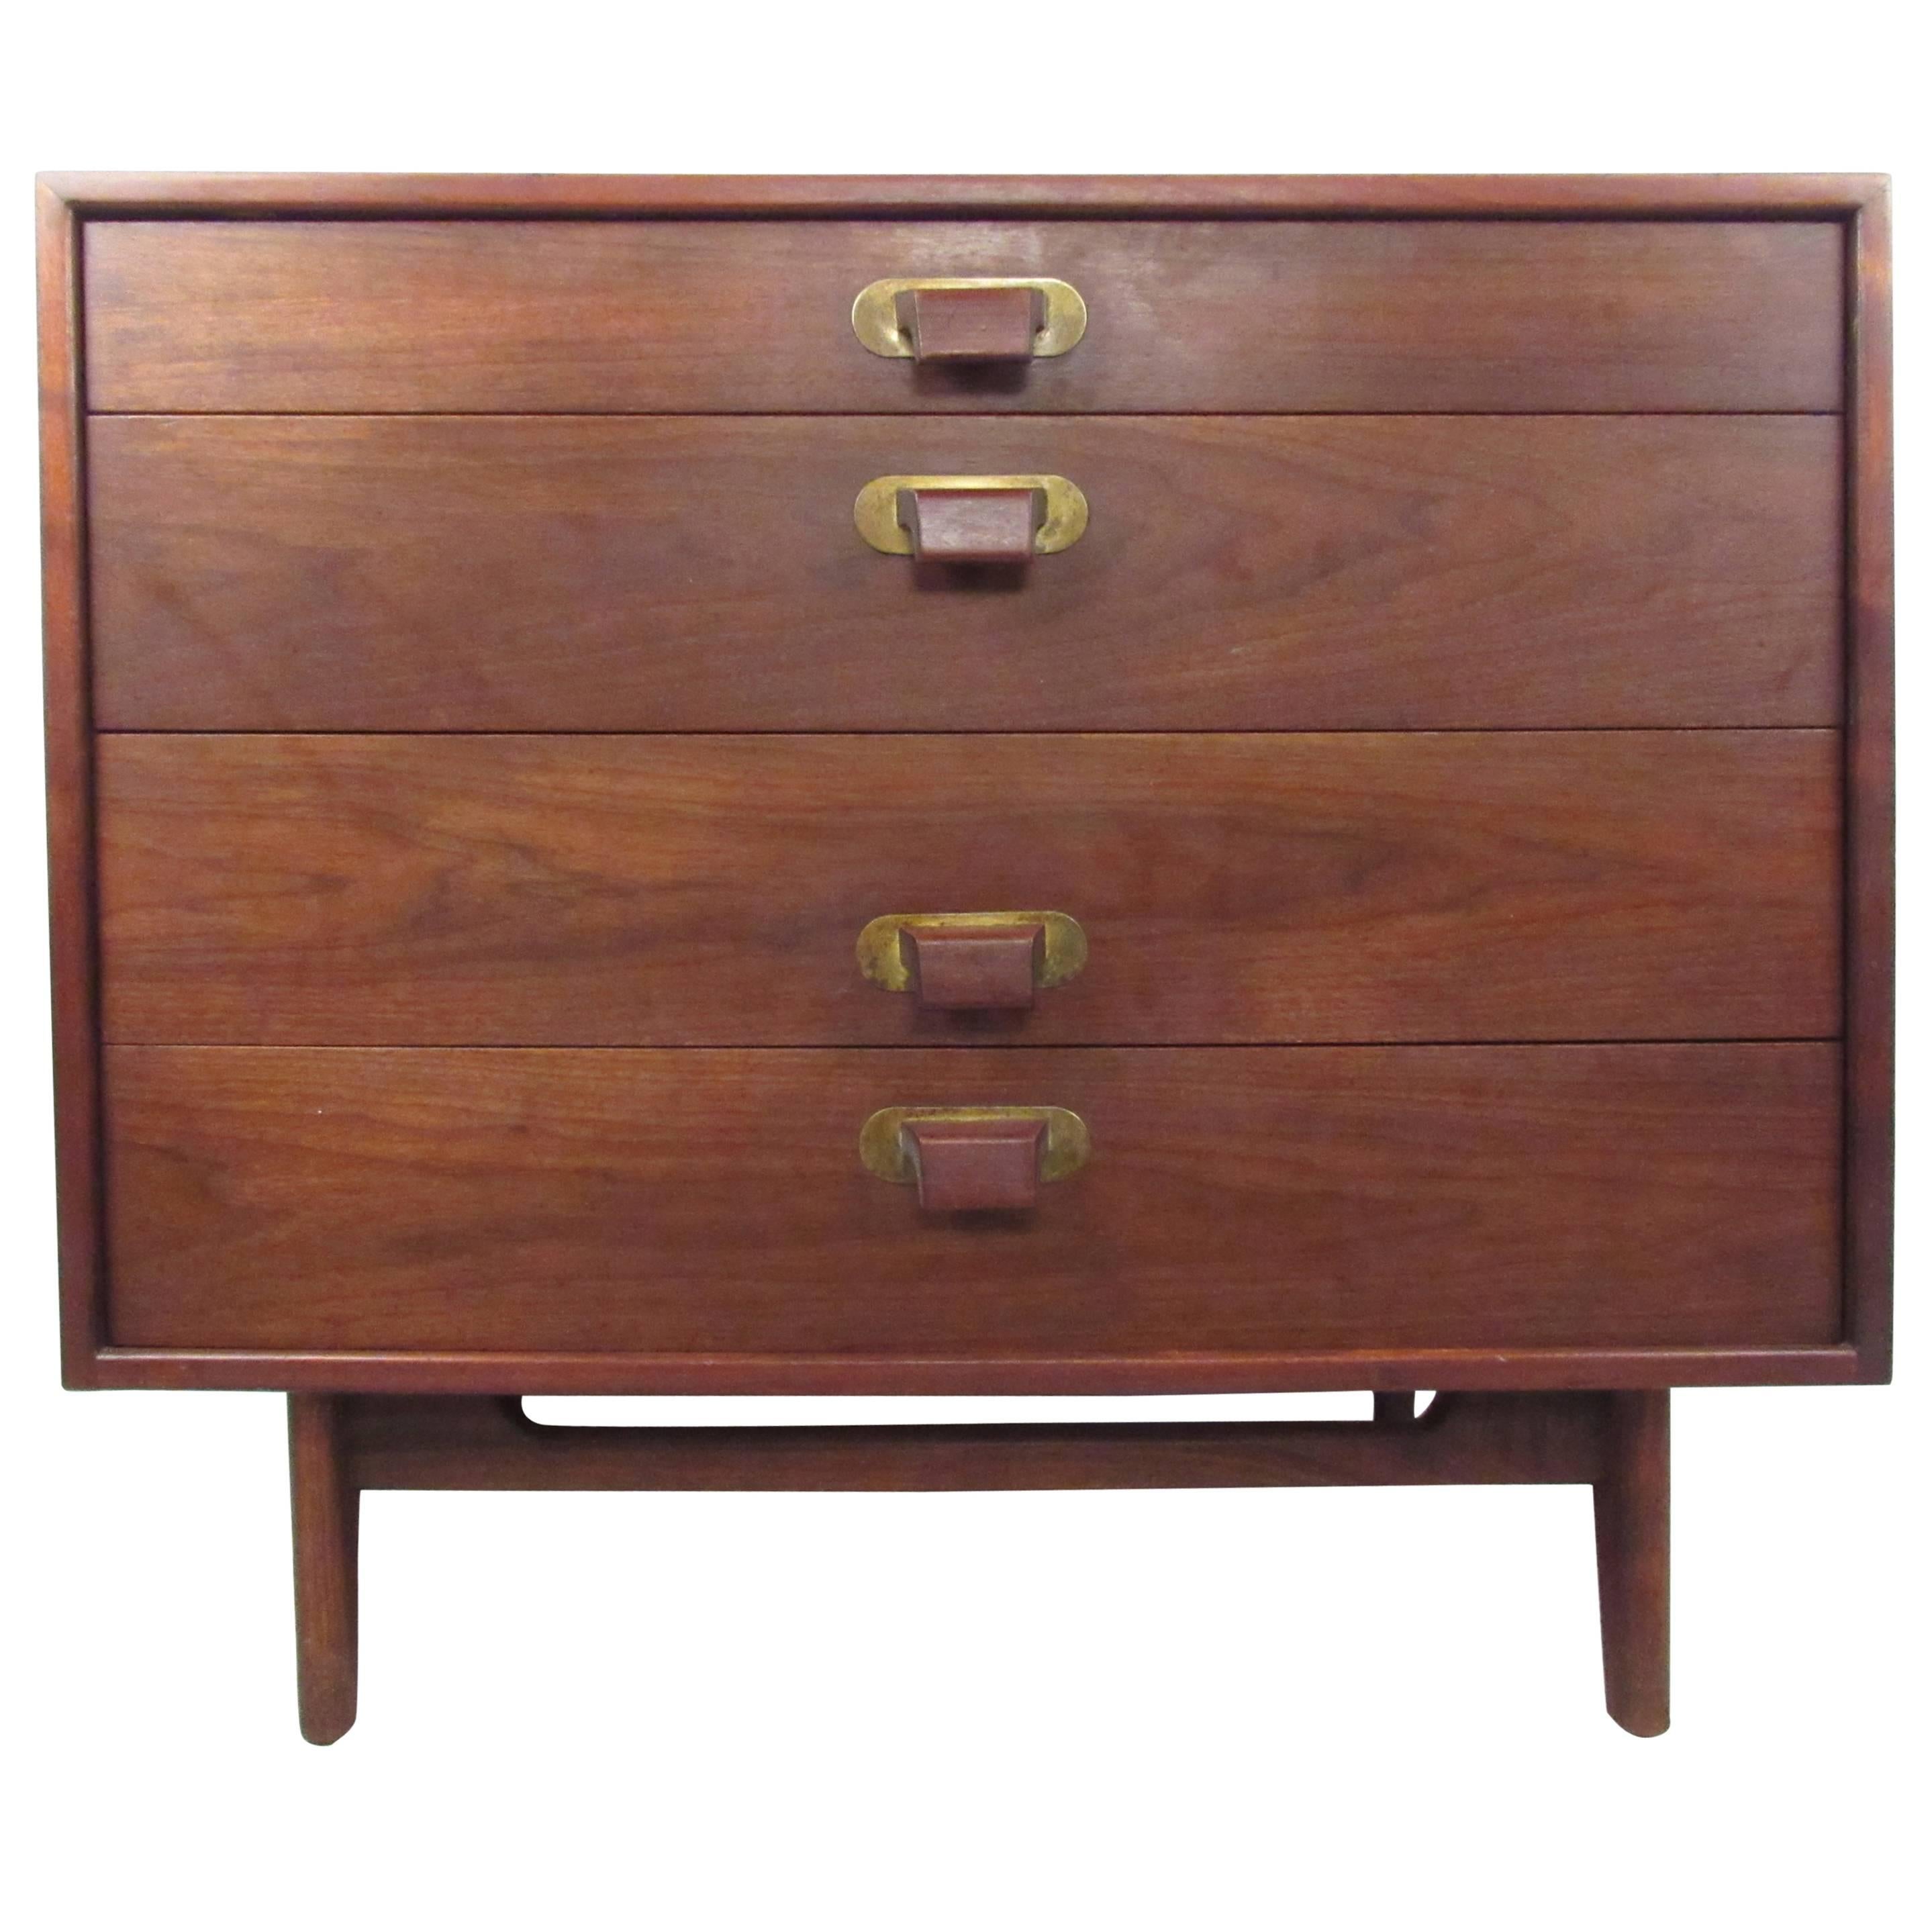 Stylish Mid-Century Modern Chest of Drawers by Jens Risom